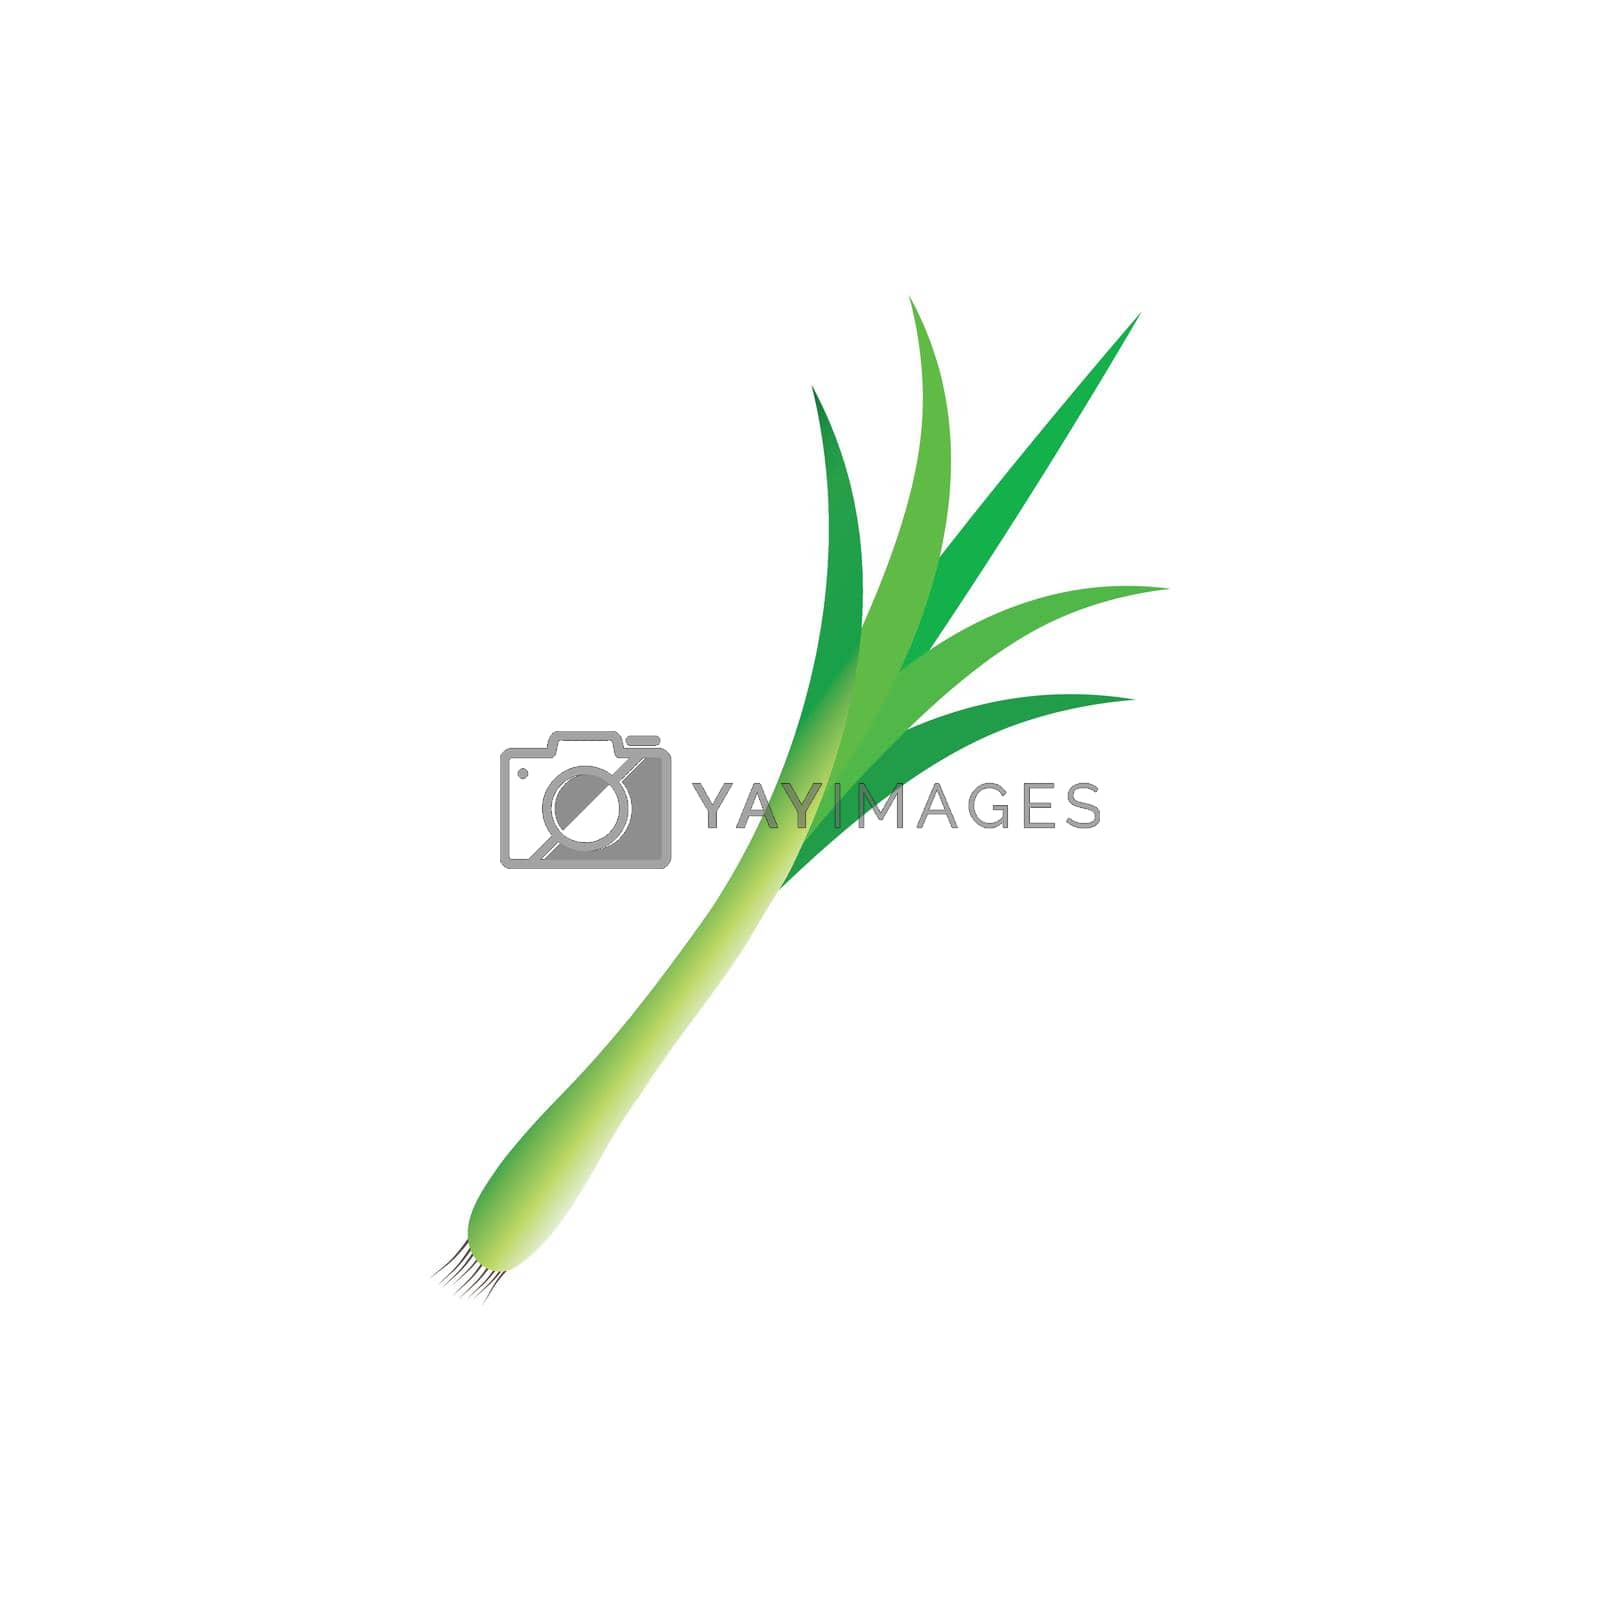 Royalty free image of Leek vegetable icon template  by ABD03